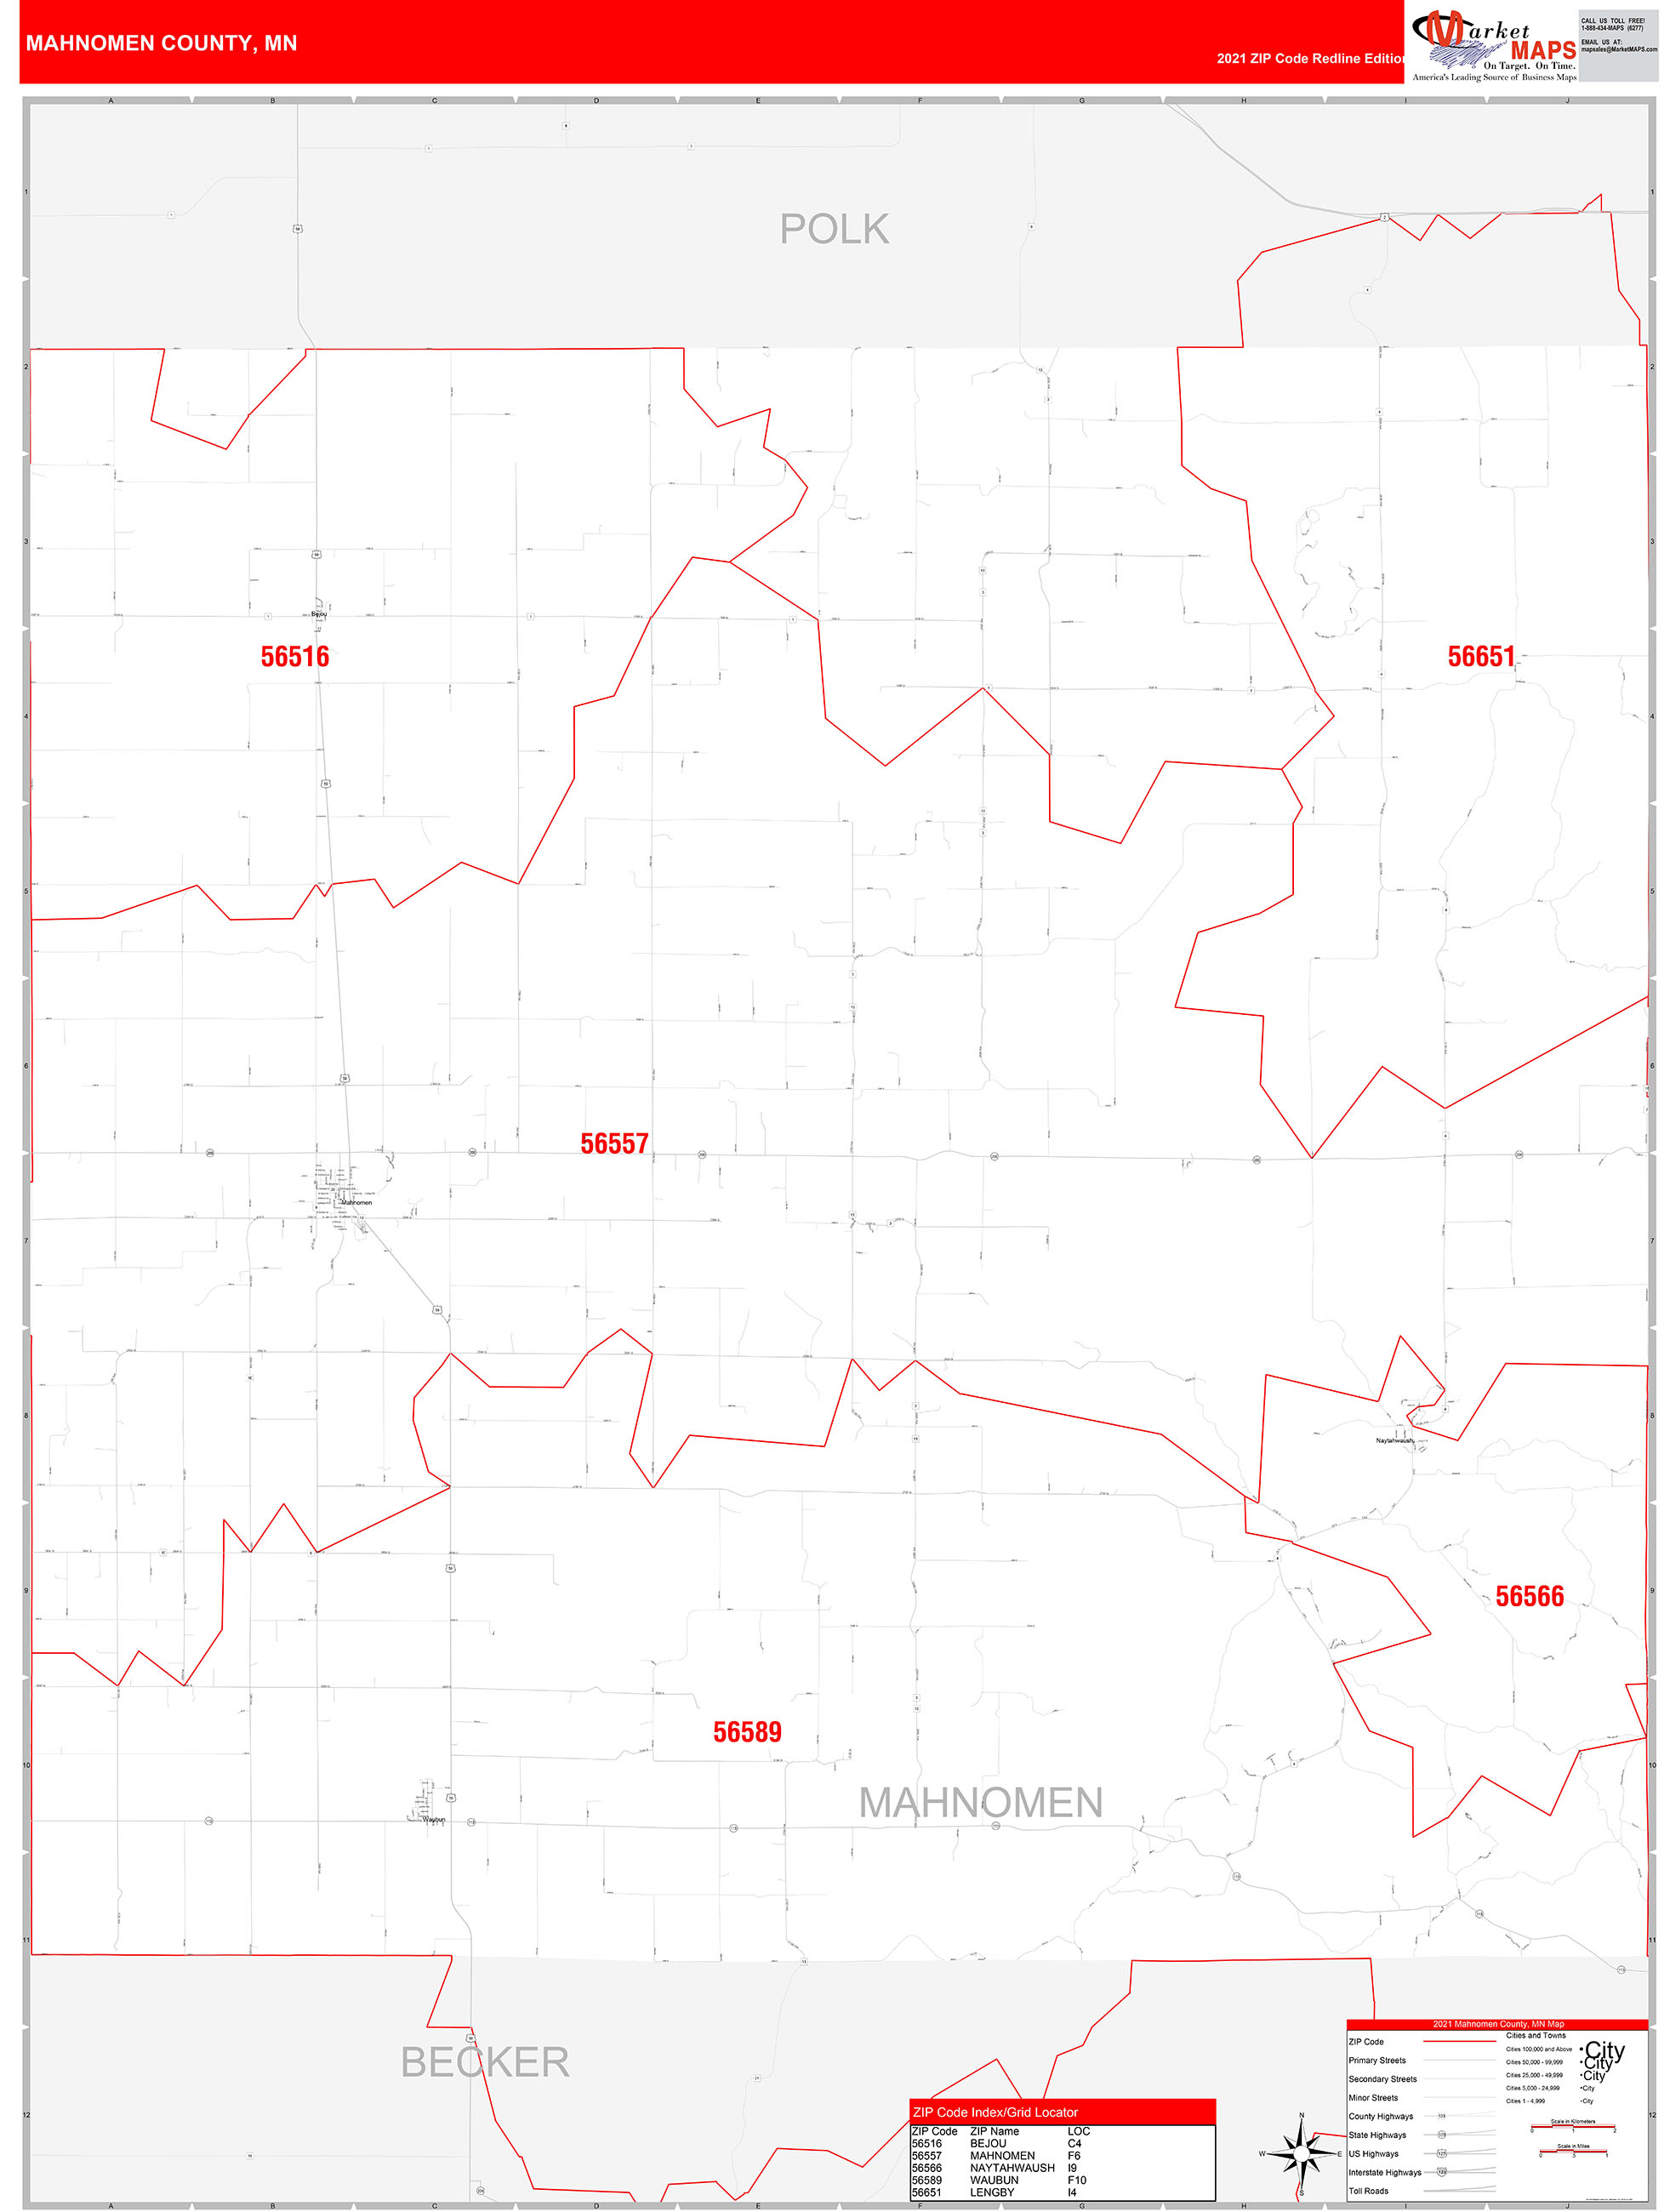 Mahnomen County MN Zip Code Wall Map Red Line Style by MarketMAPS